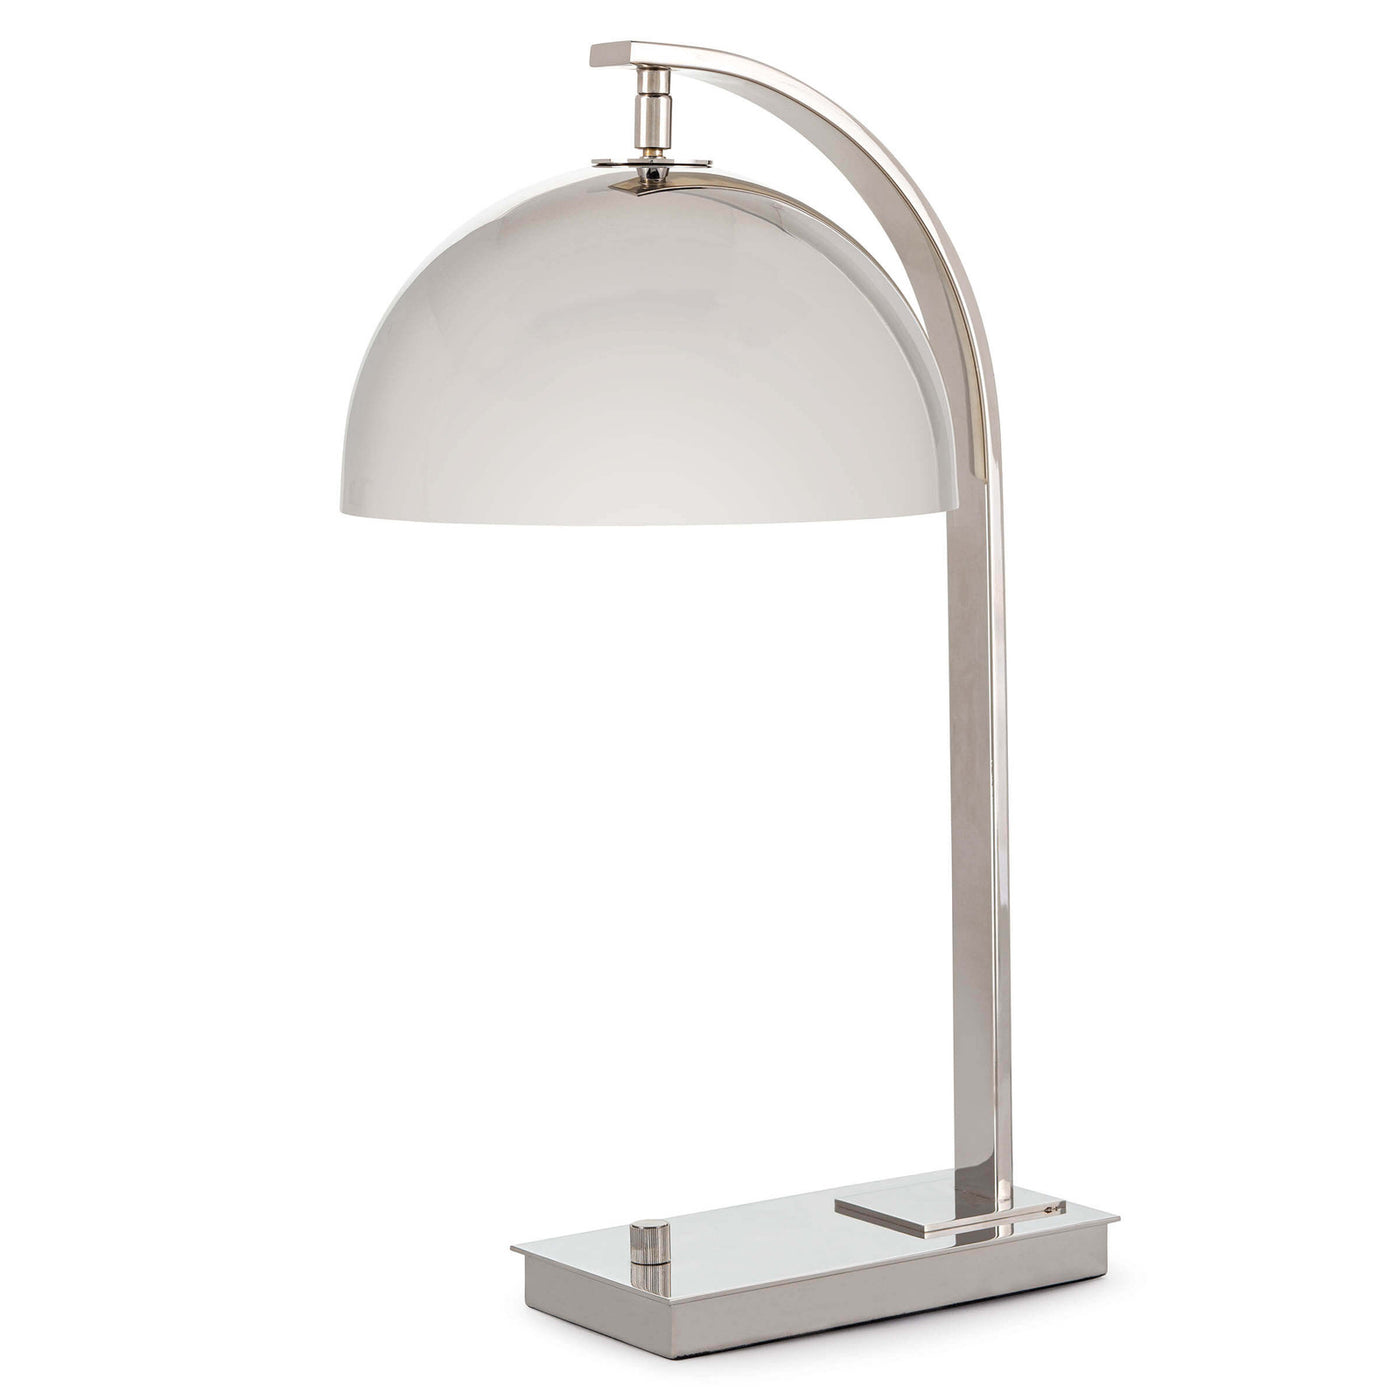 DESK LAMP METAL DOME (Available in Colors)